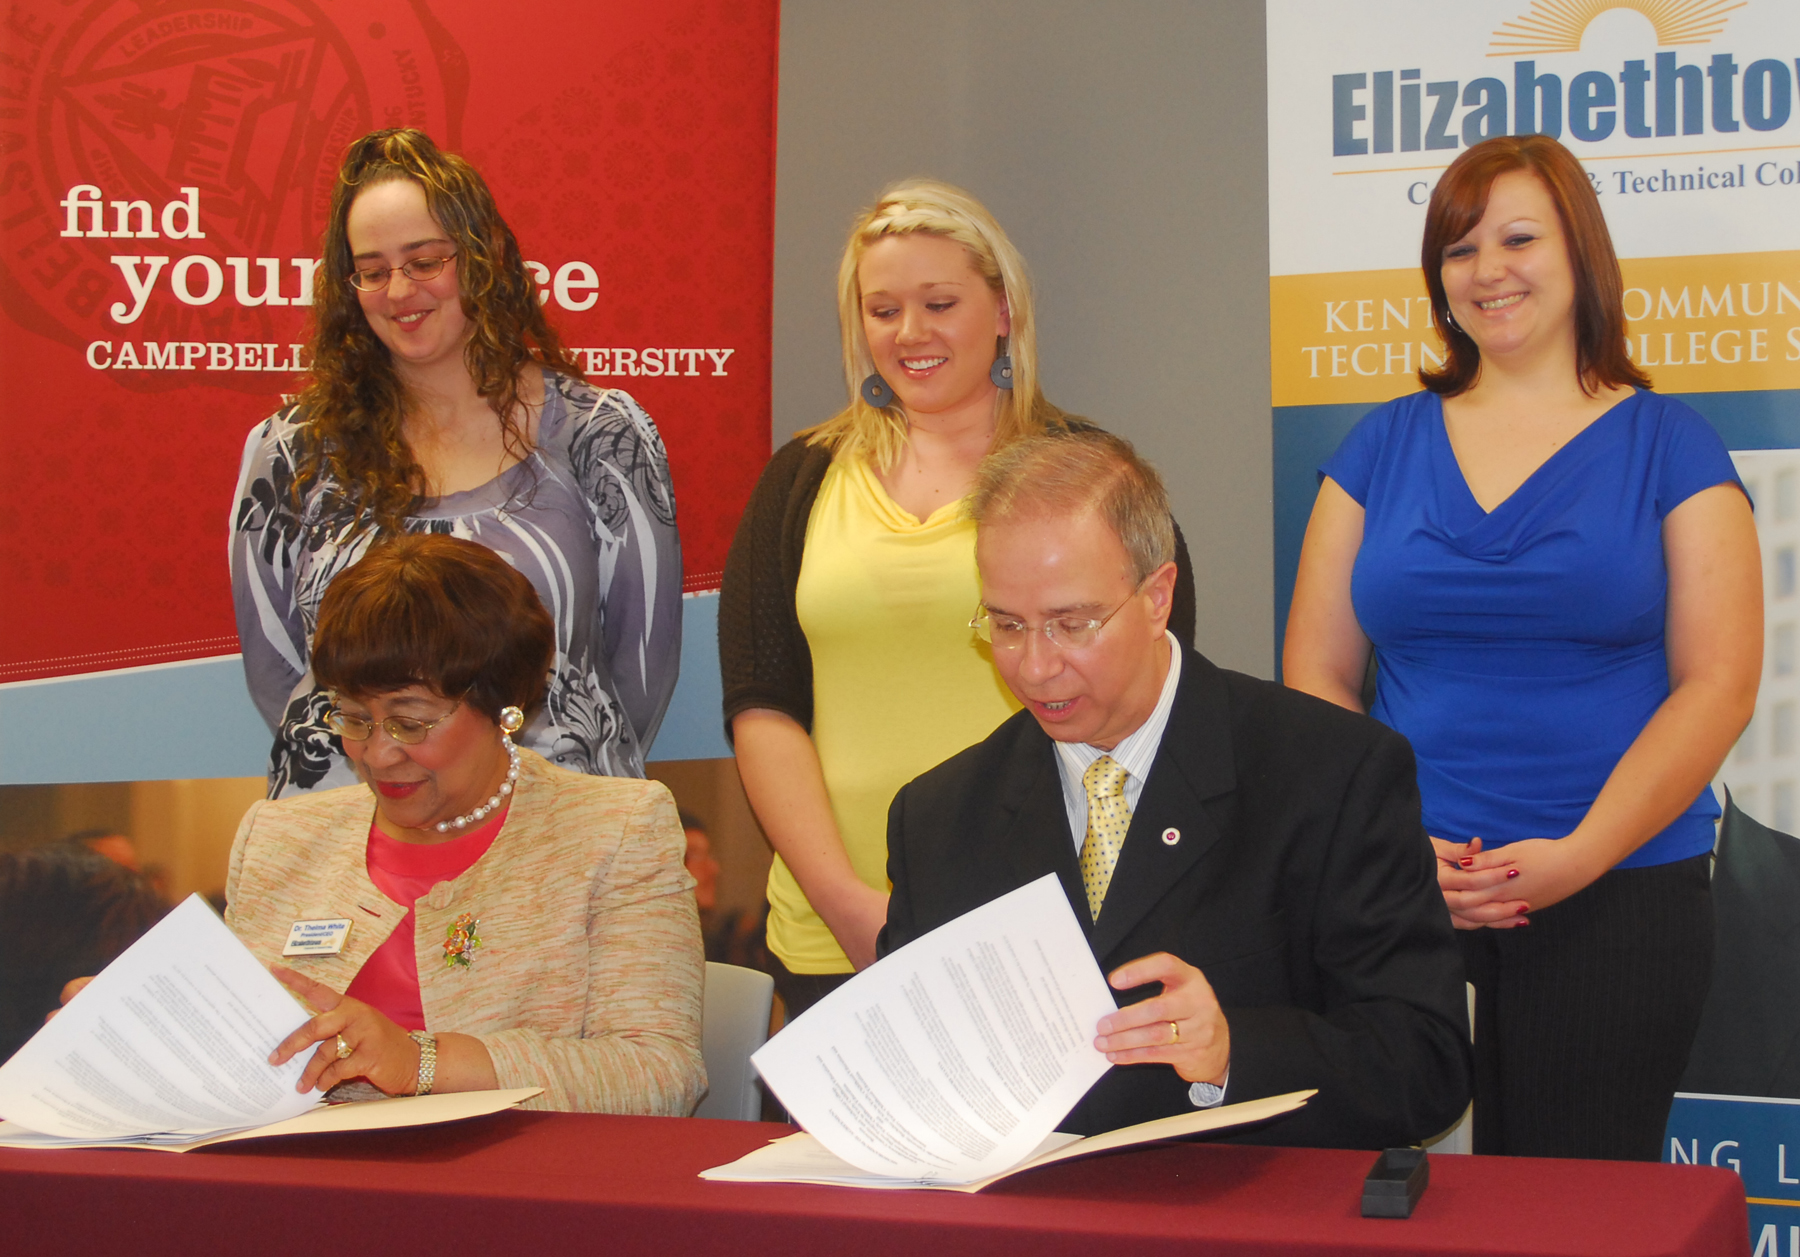 Dr. Michael V. Carter, right, president of Campbellsville University, and Dr. Thelma White, president and chief executive officer of Elizabethtown Community & Technical College, sign memoranda of agreement between their two institutions that will allow ECTC students to transfer credits to CU and obtain four bachelor degrees. Students watching the signing were: from left, Jessica Haire of Elizabethtown, a student at ECTC; and CU students Brooke Cooper of Russell Springs, Ky., and Amanda Adkins Powers of Hodgenville. (Campbellsville University Photo by Joan C. McKinney)